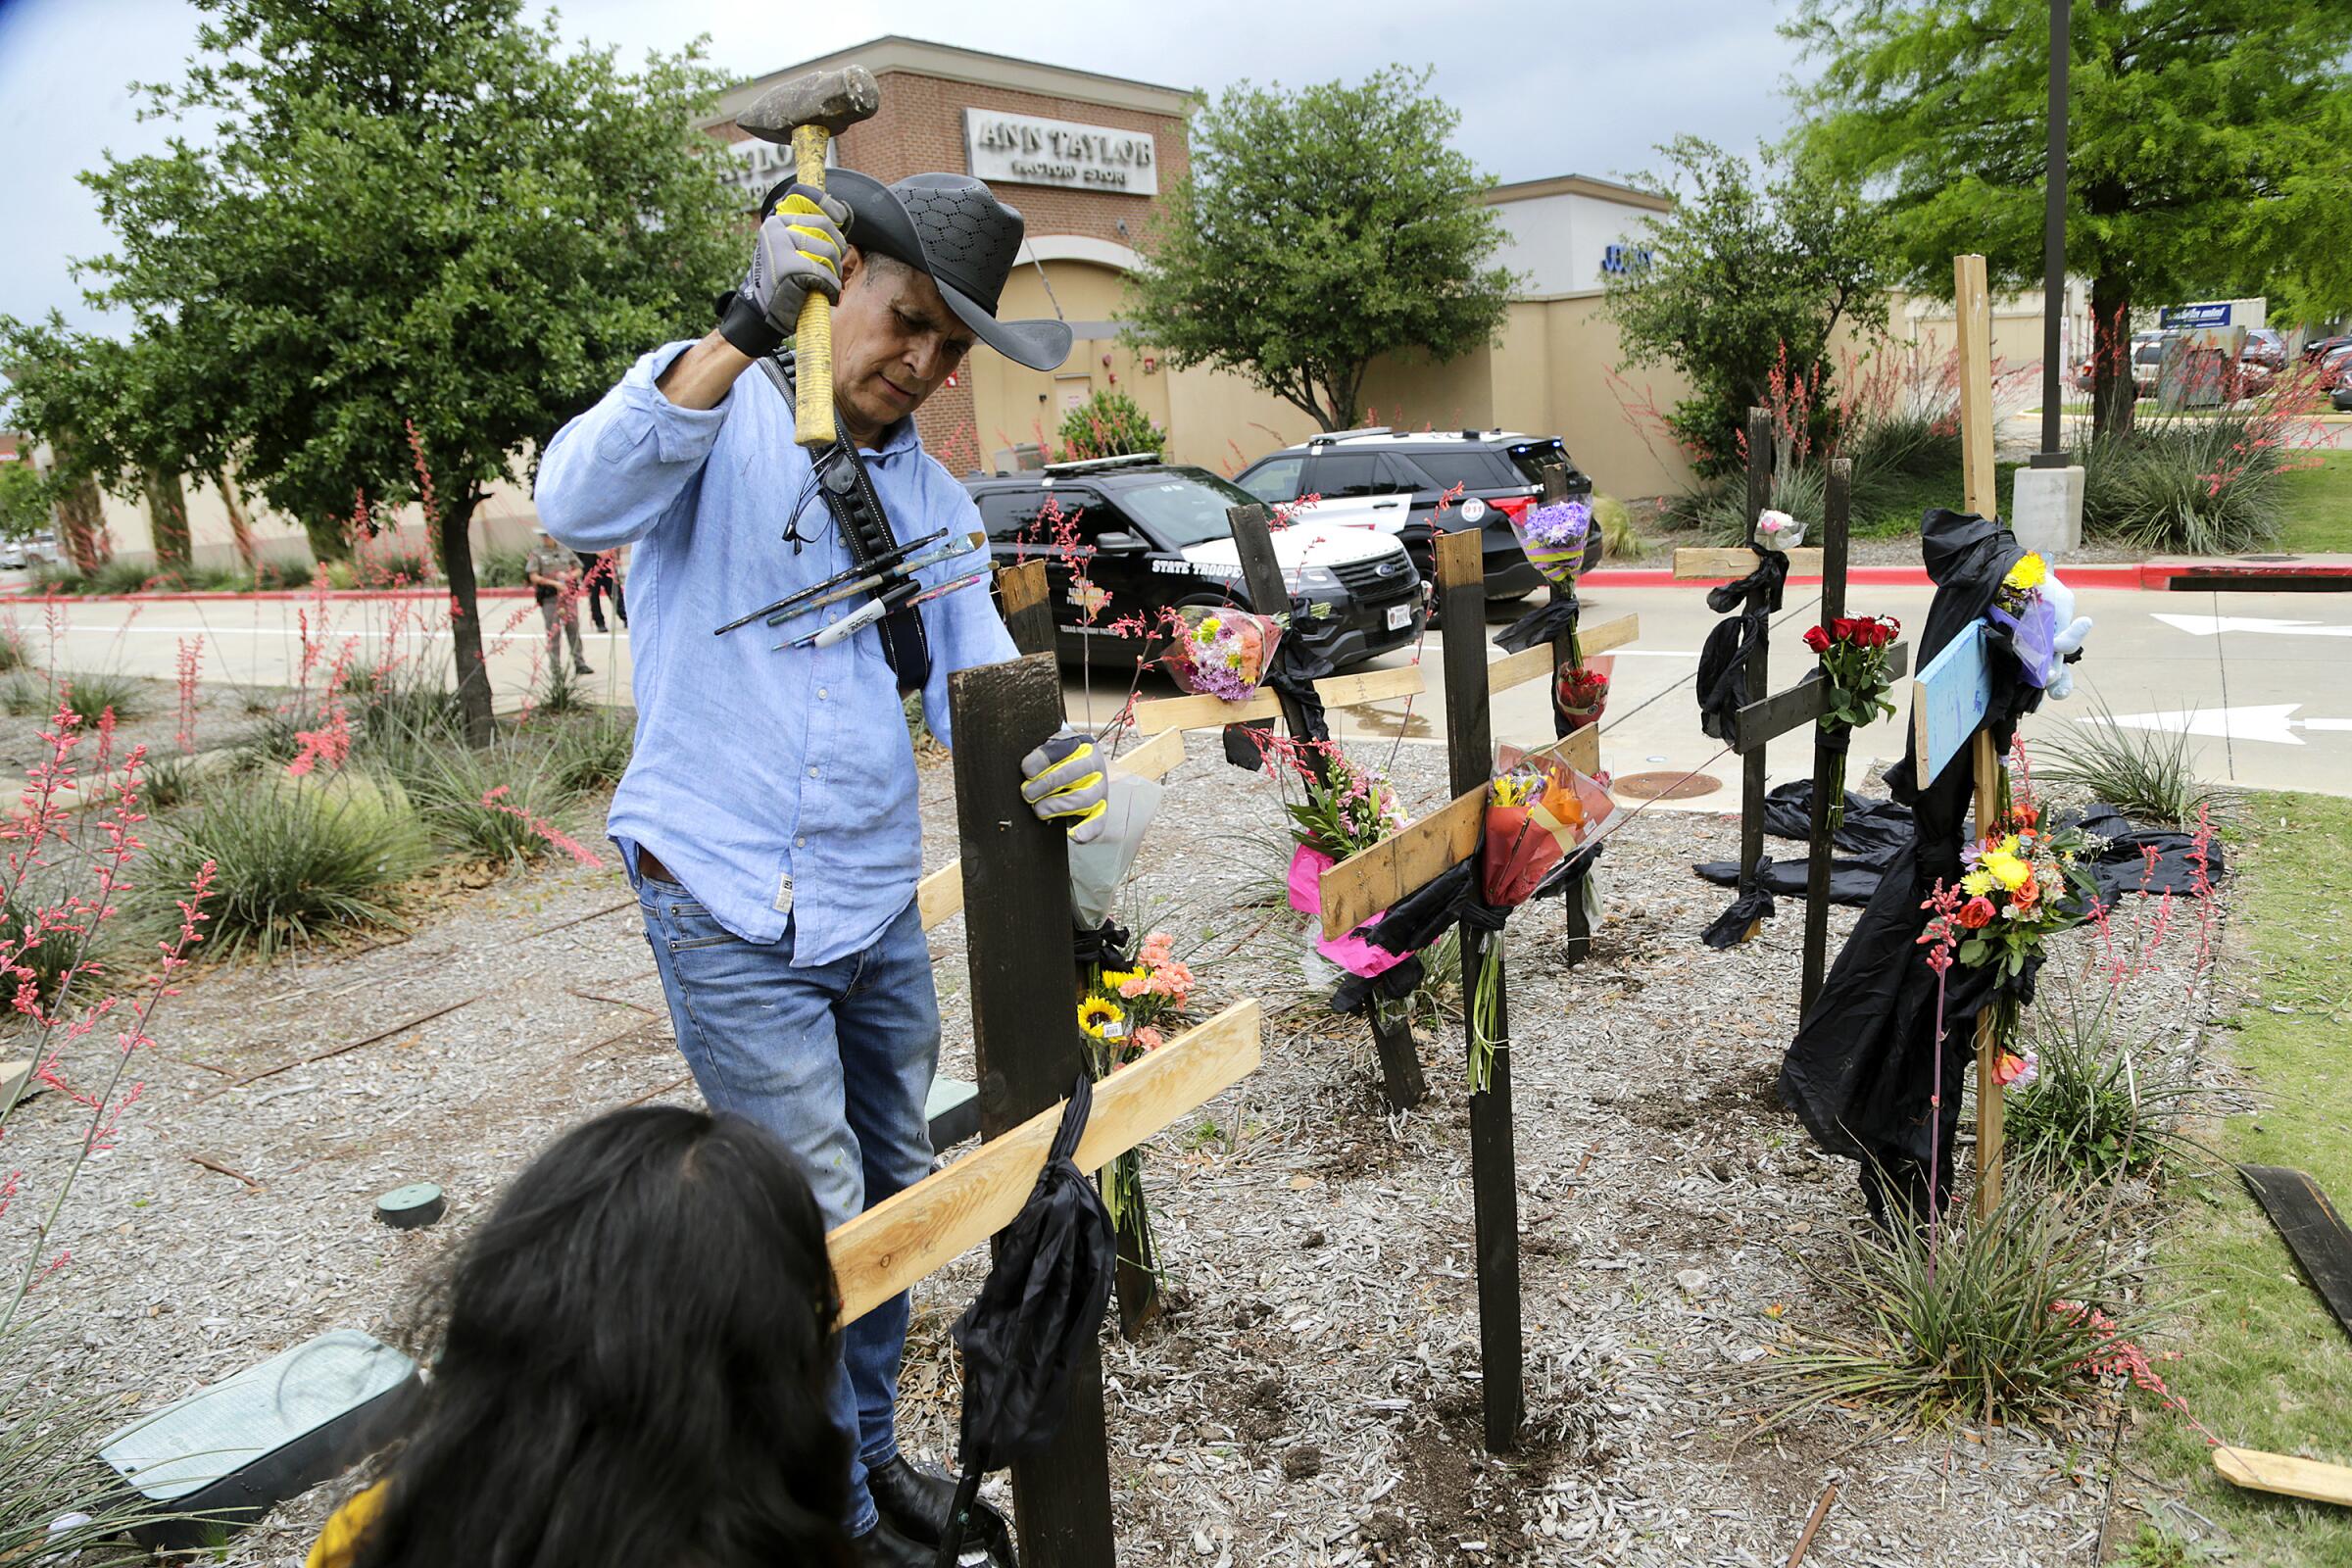 Roberto Marquez of Dallas constructs a memorial of wooden crosses near the scene of a mass shooting at an outlet mall.